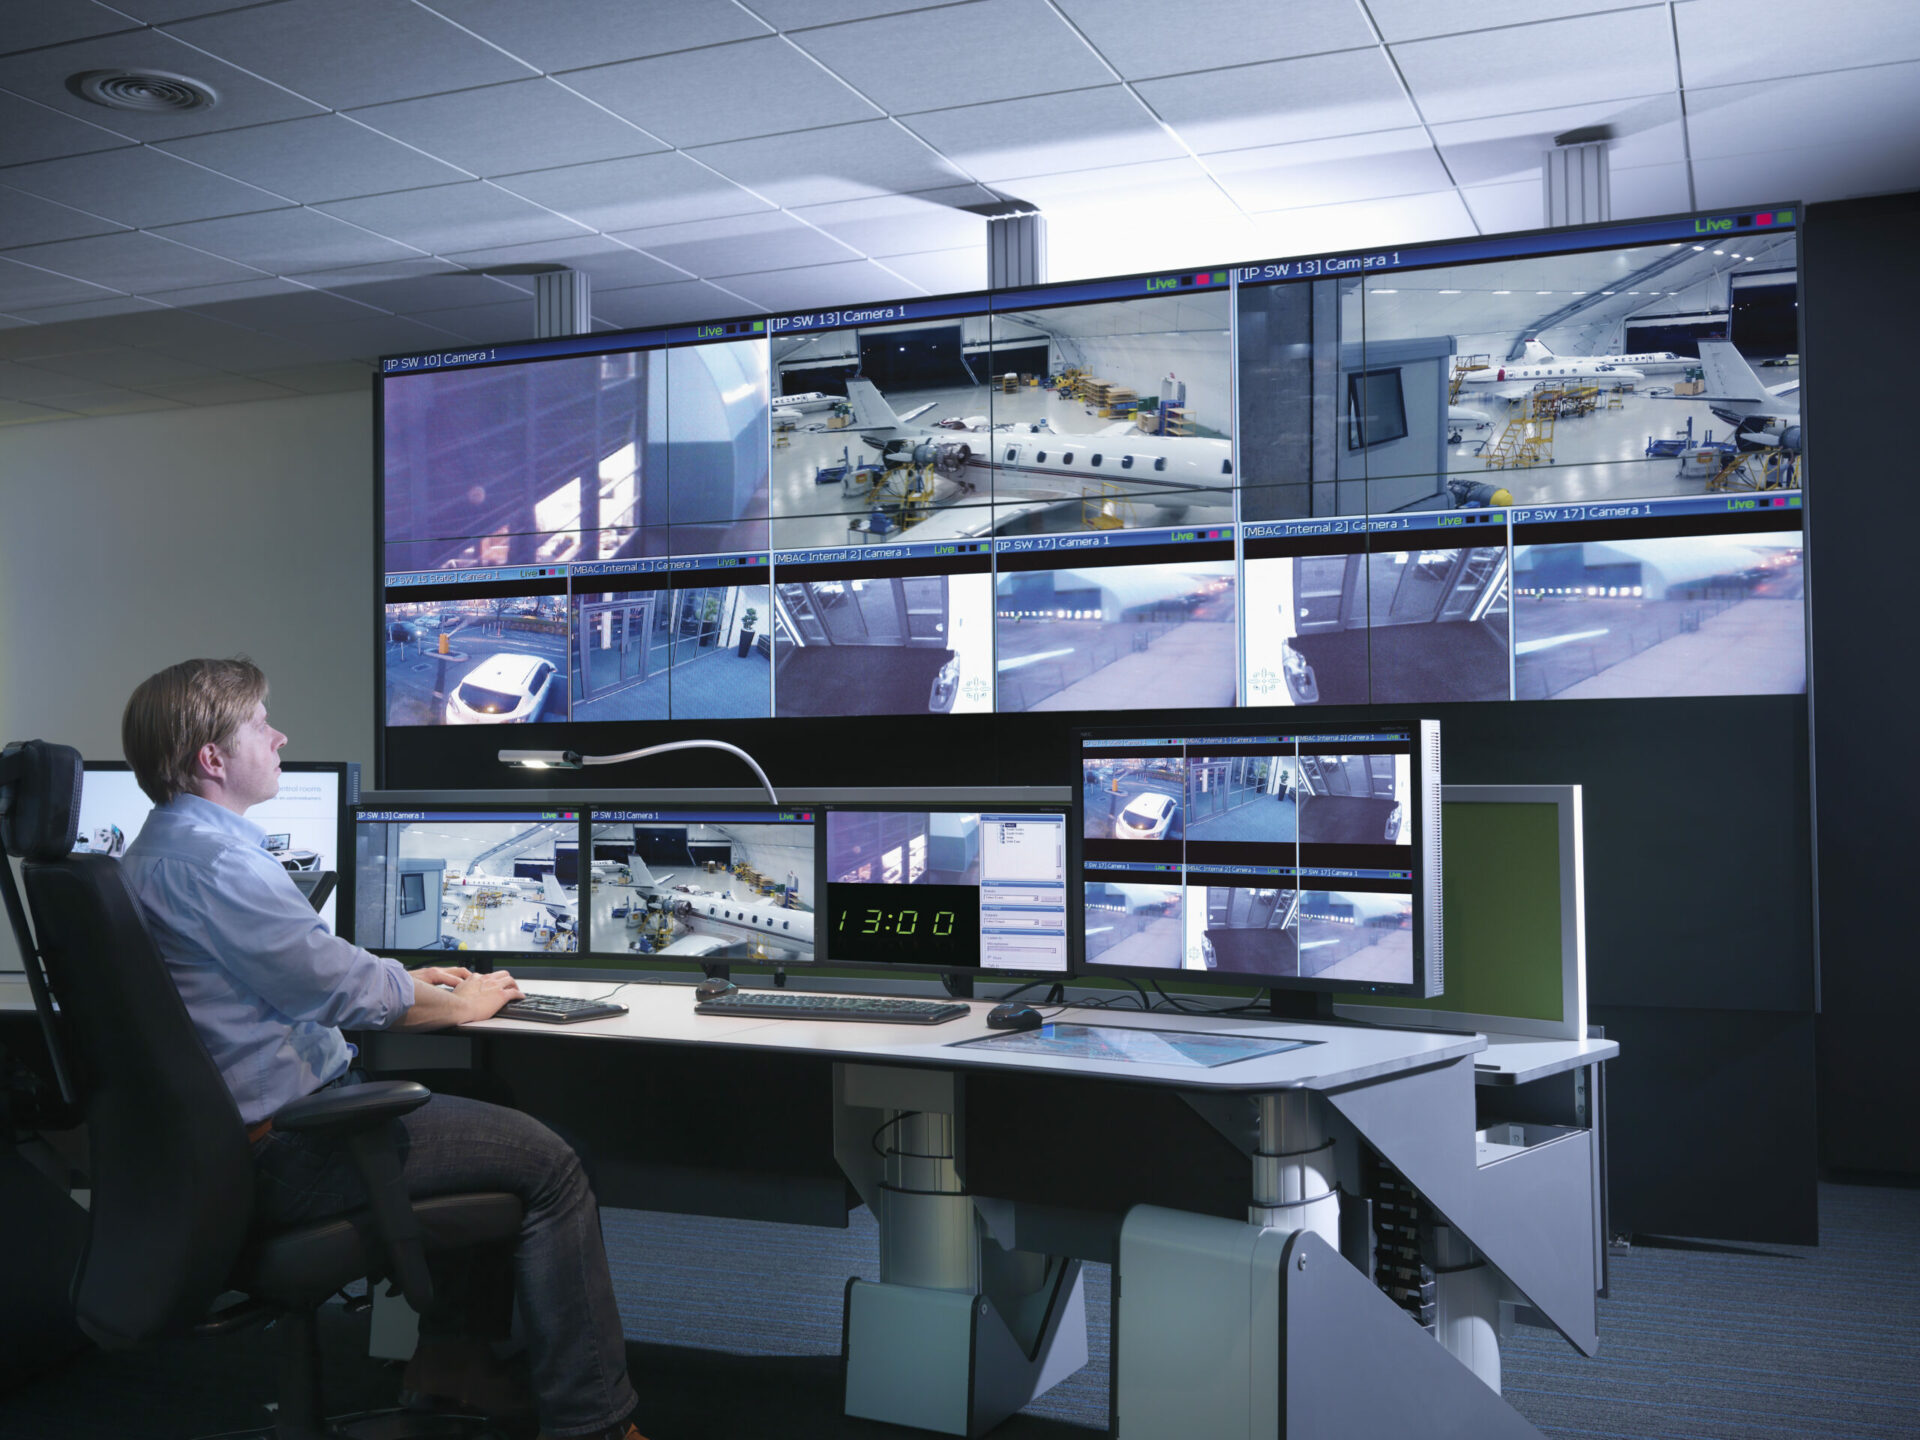 Control monitoring system with multiple AV screens